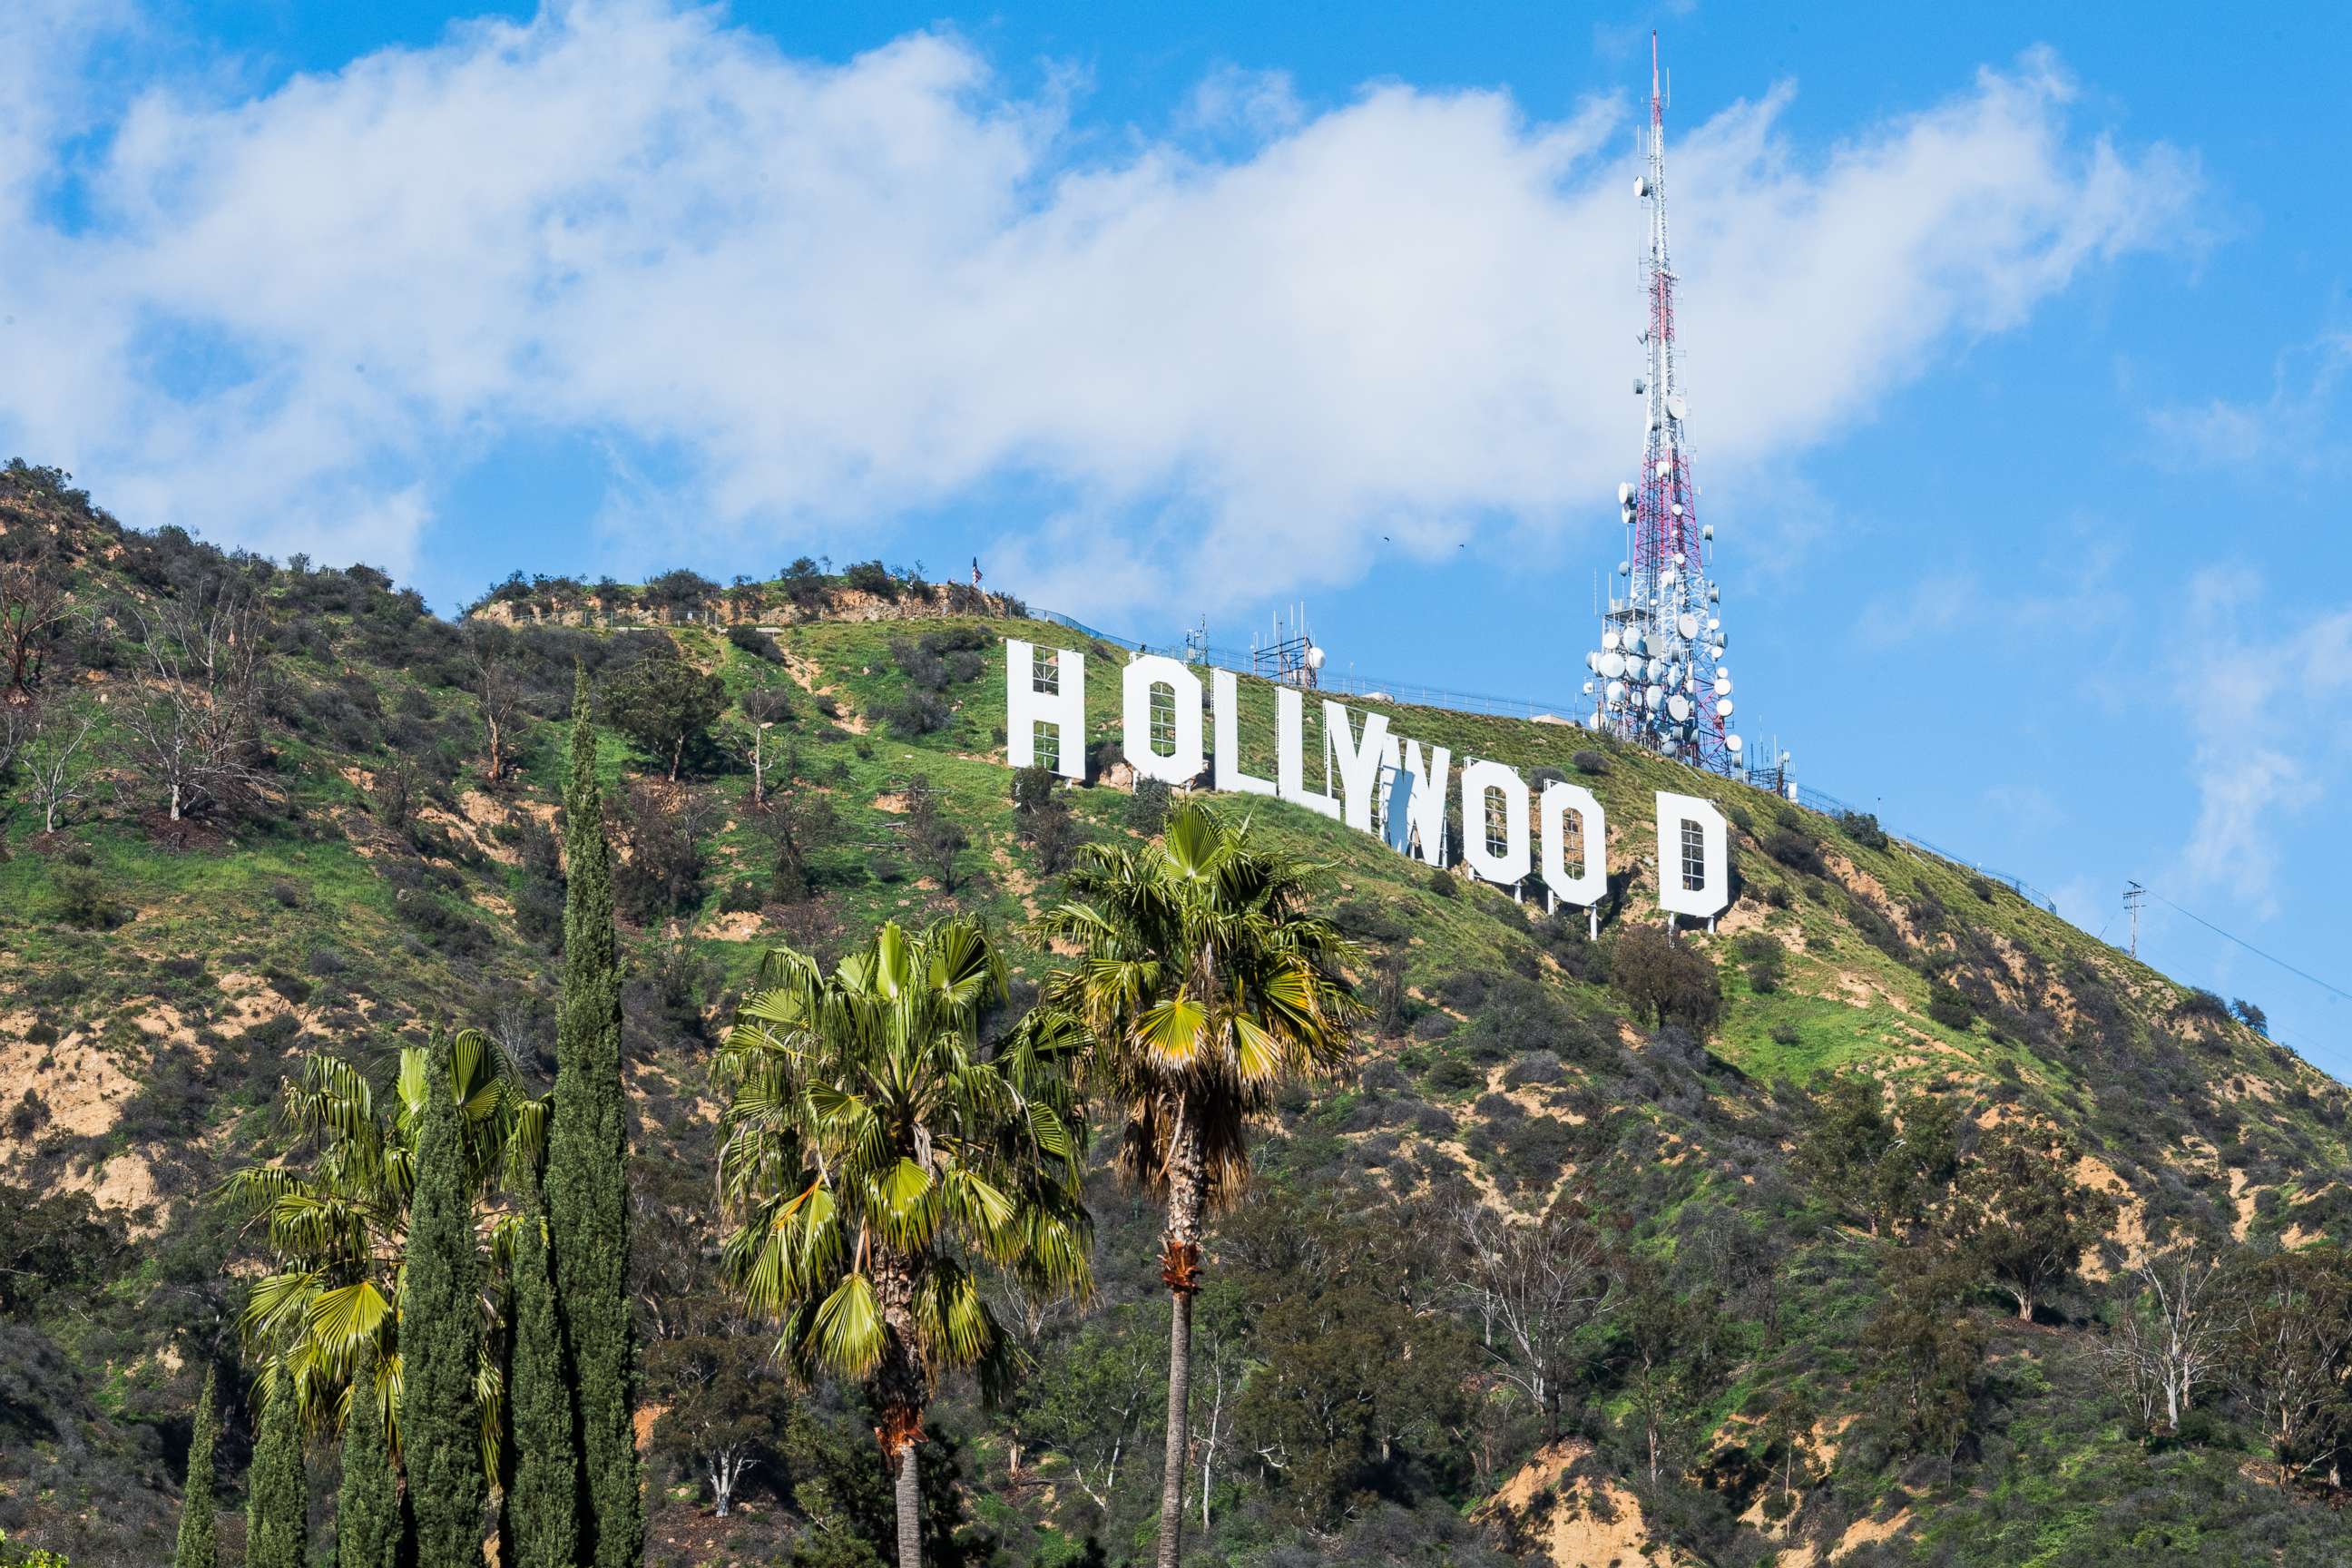 PHOTO: The Hollywood sign sits in the in the Hollywood Hills area of the Santa Monica Mountains in Los Angeles, March 5, 2017.